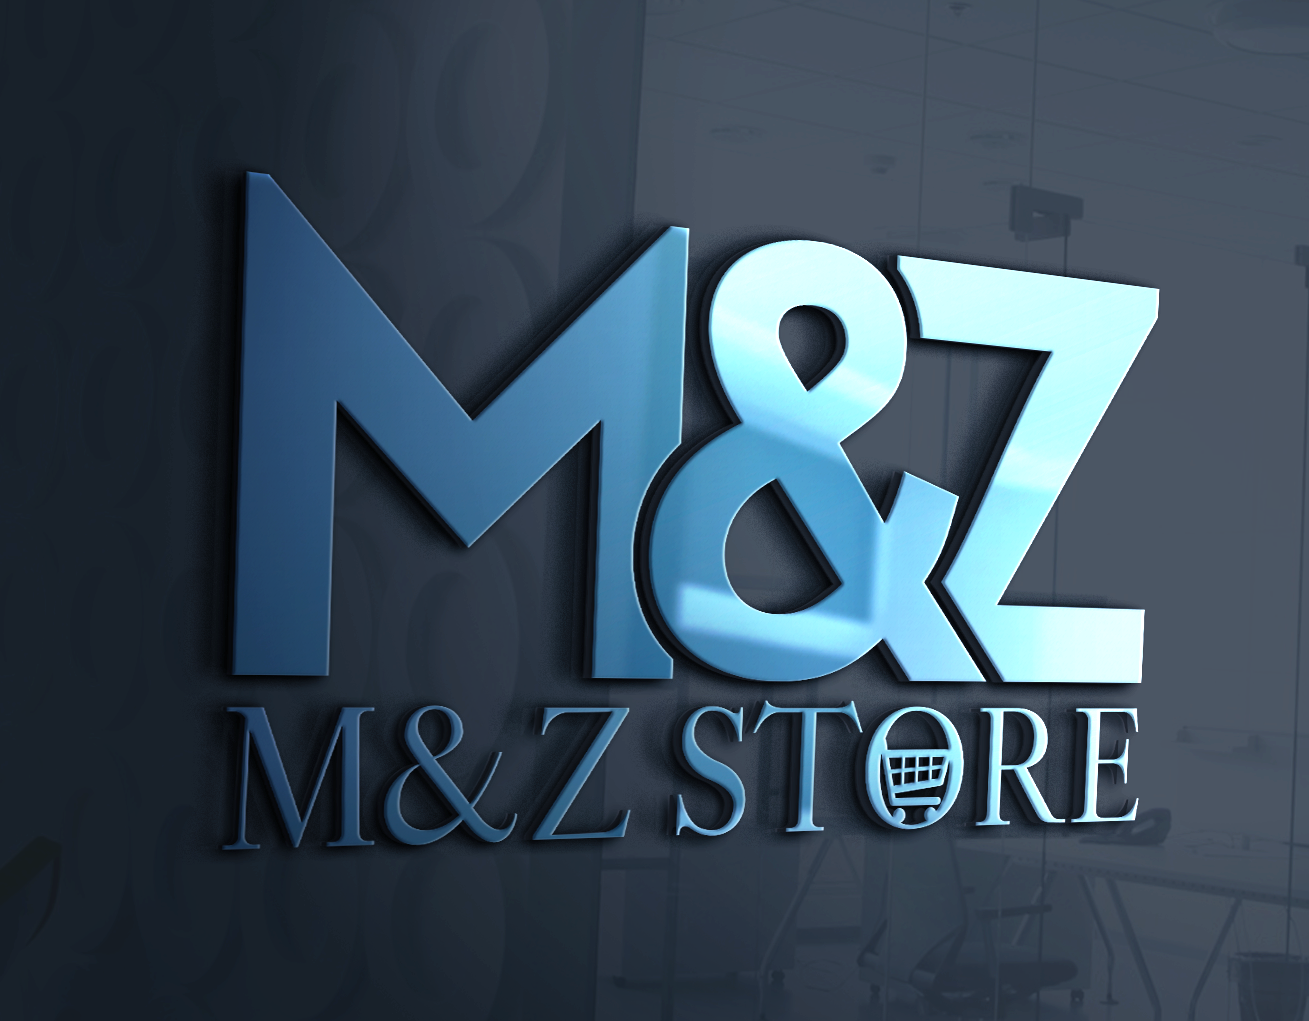 M&Z Store